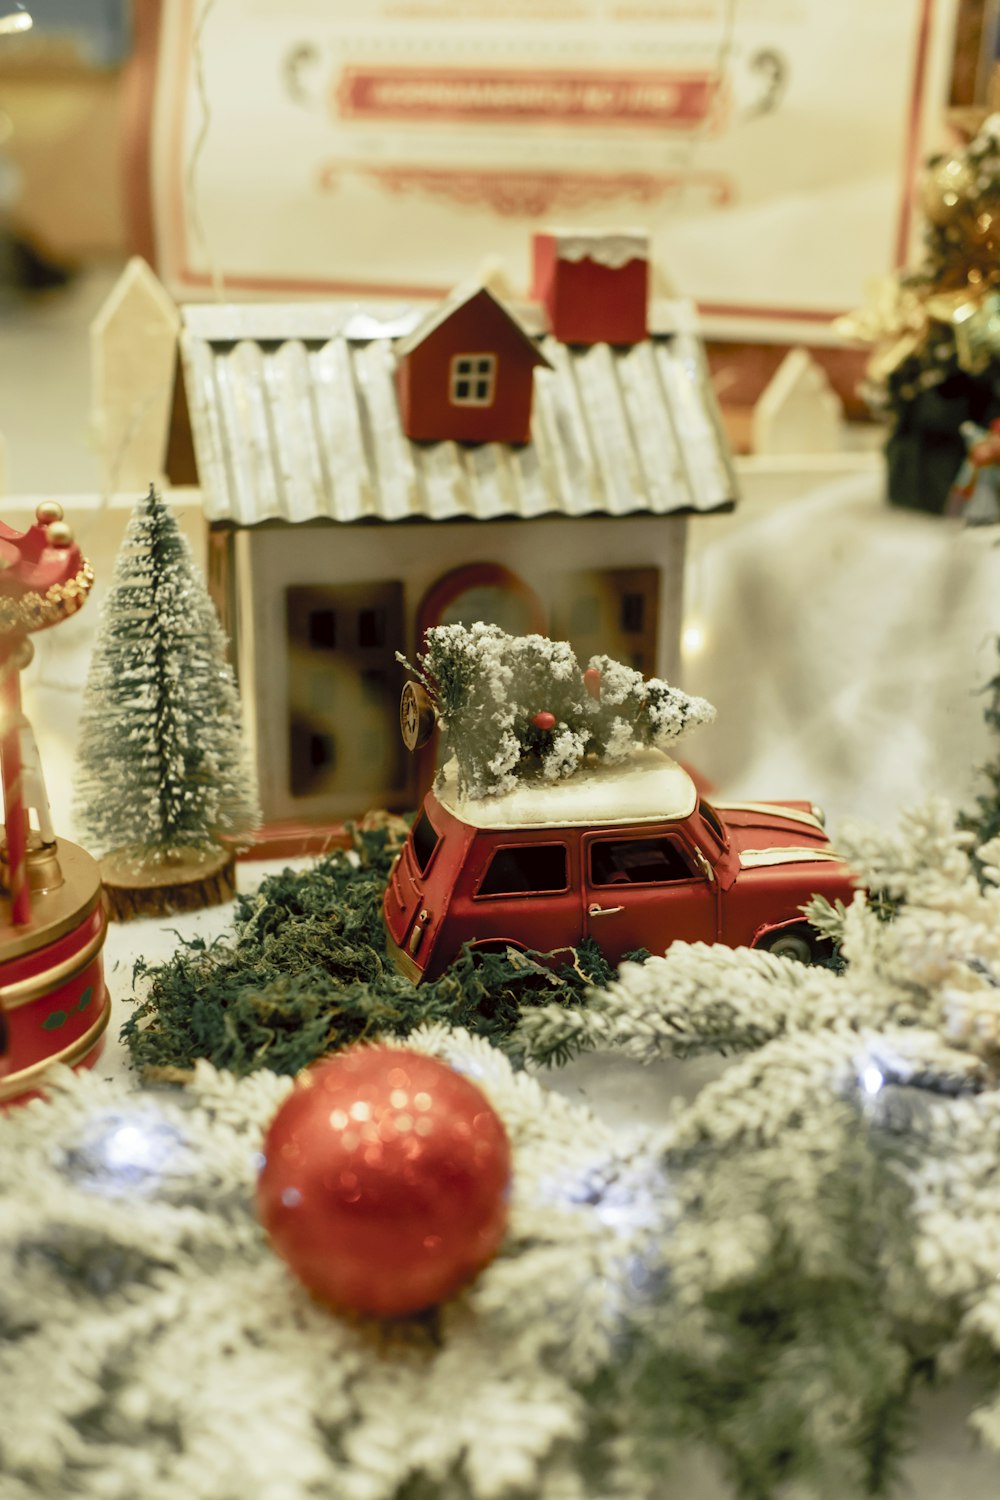 a christmas scene with a toy car and a house